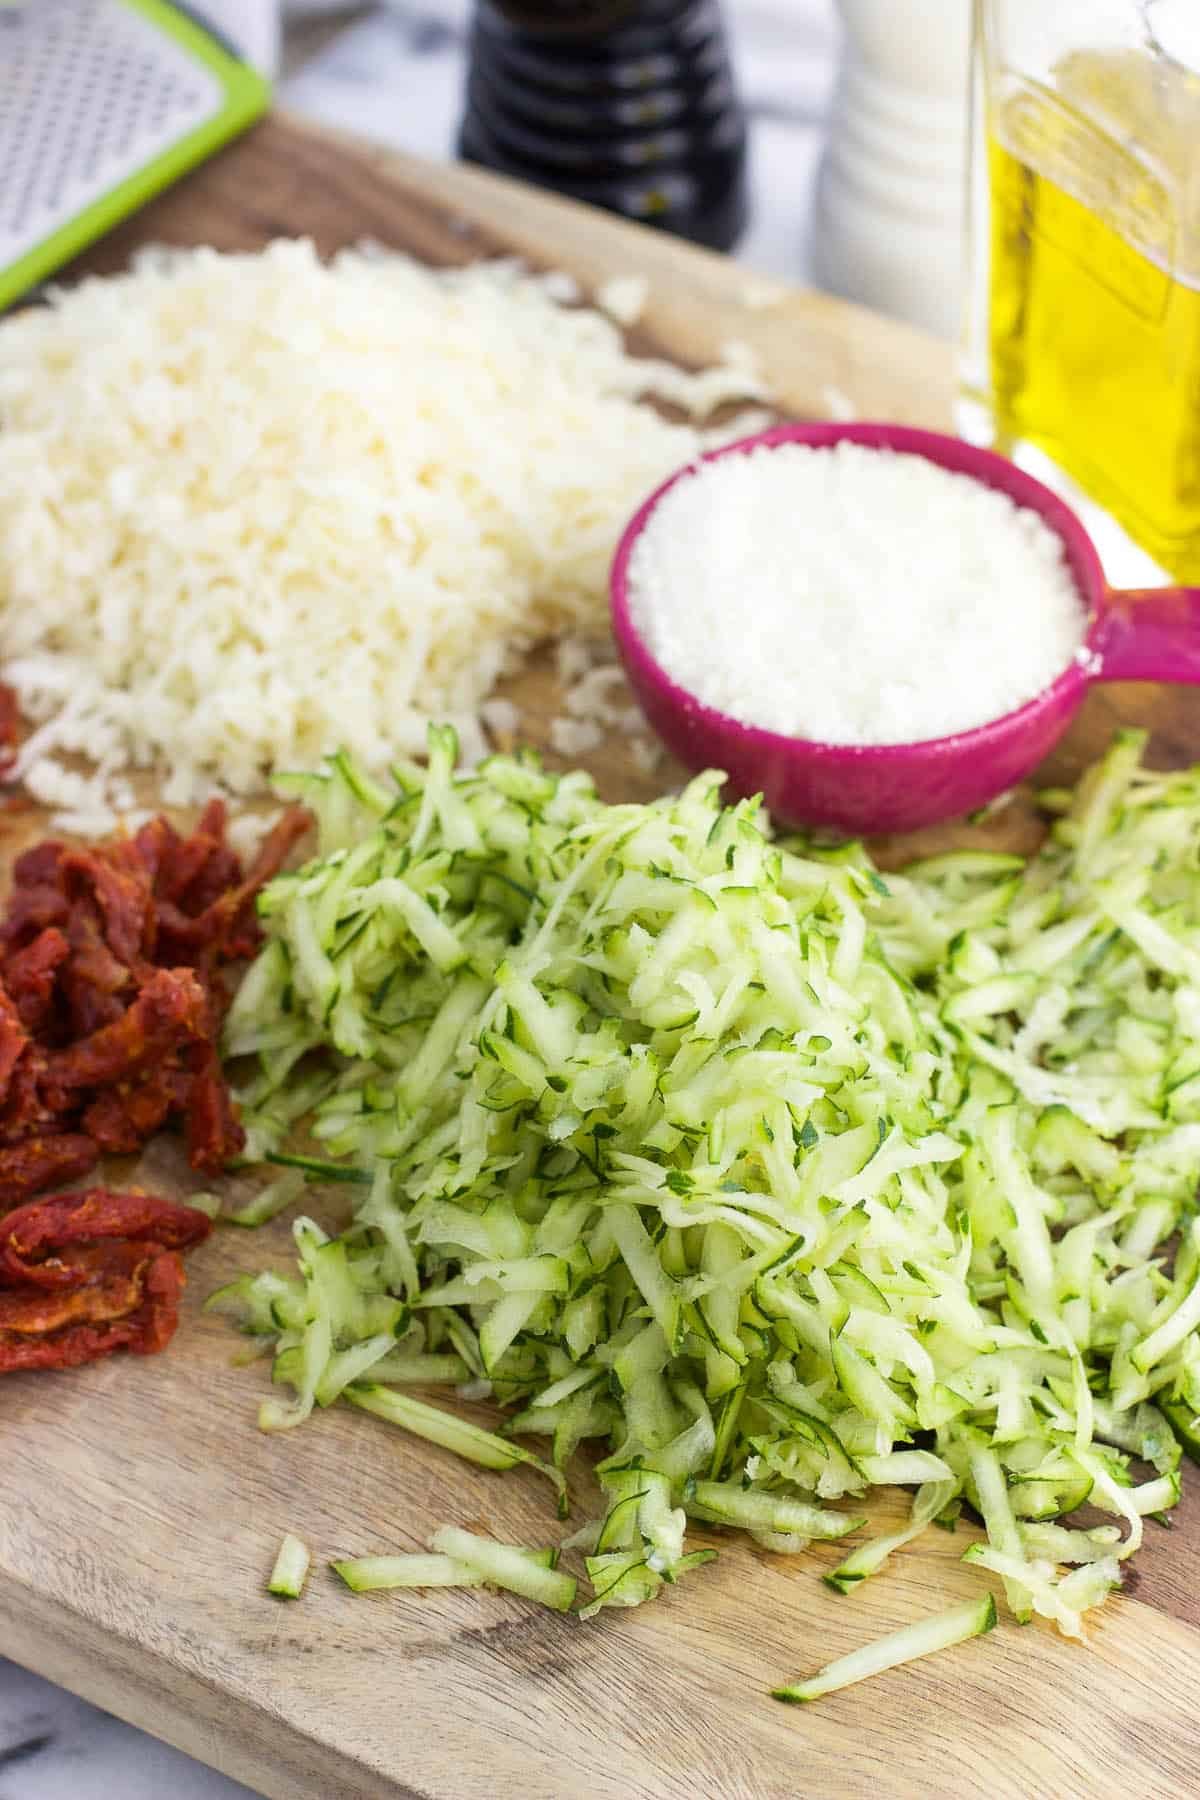 Shredded cheese, zucchini, and sun-dried tomatoes on a wooden cutting board.